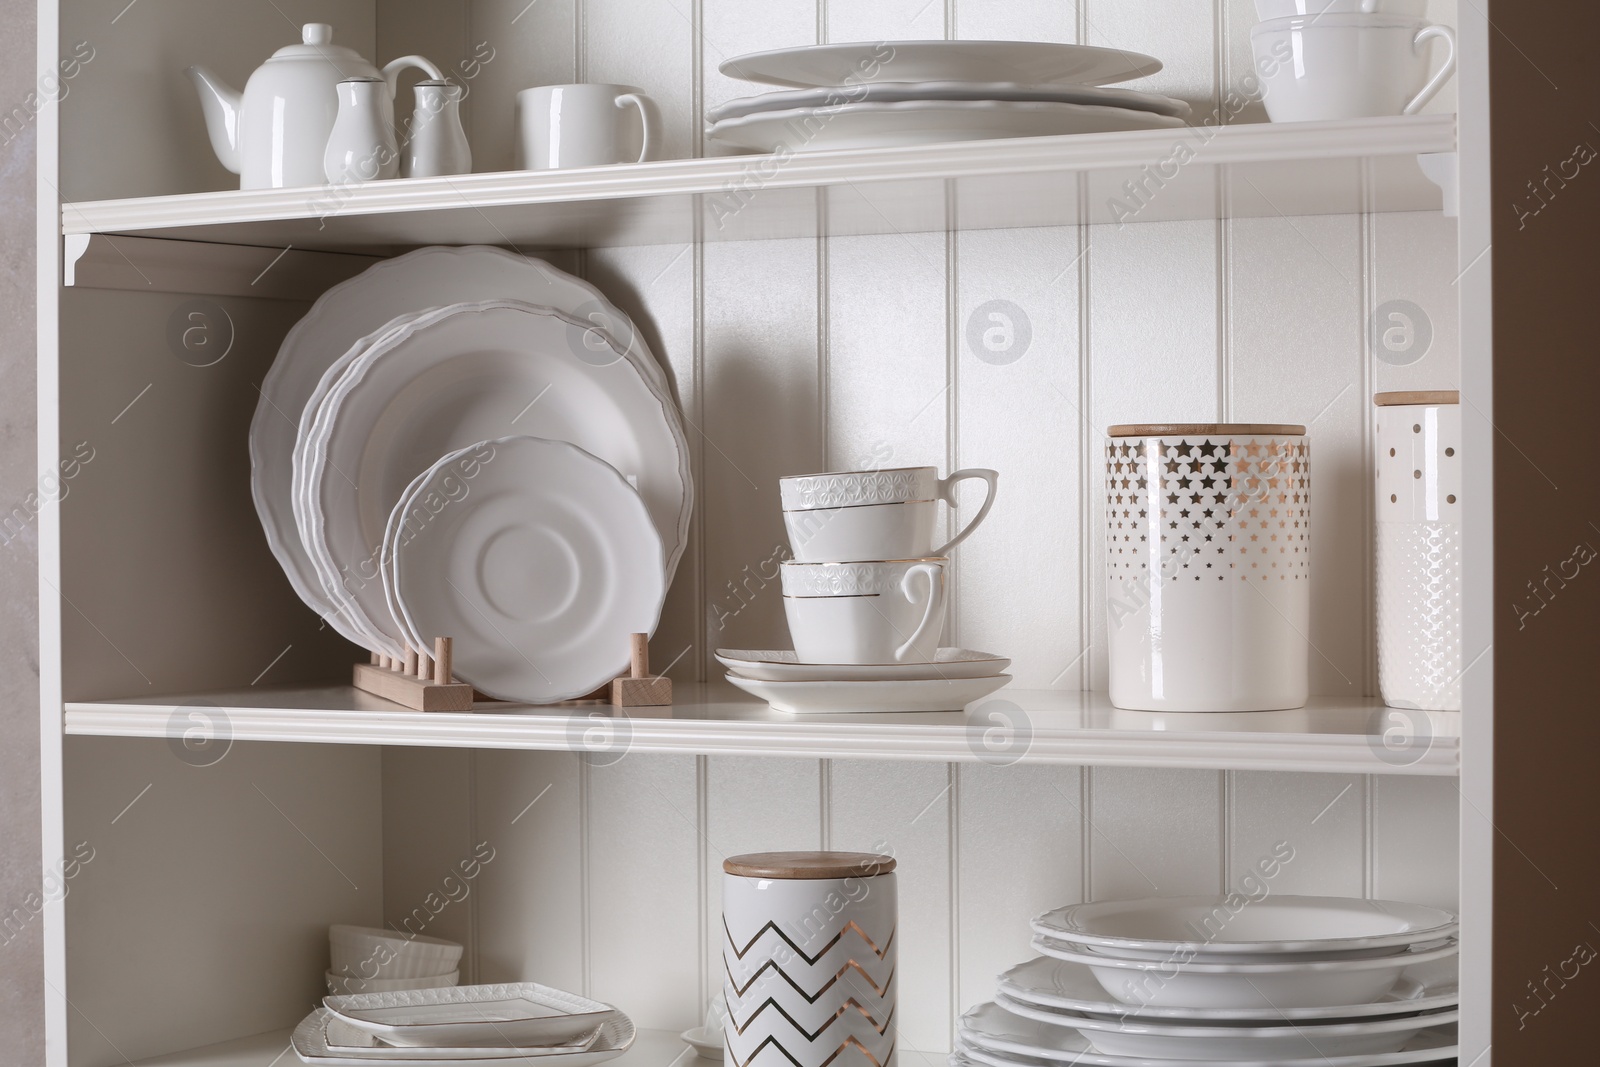 Photo of Stylish storage stand with different ceramic dishware at home